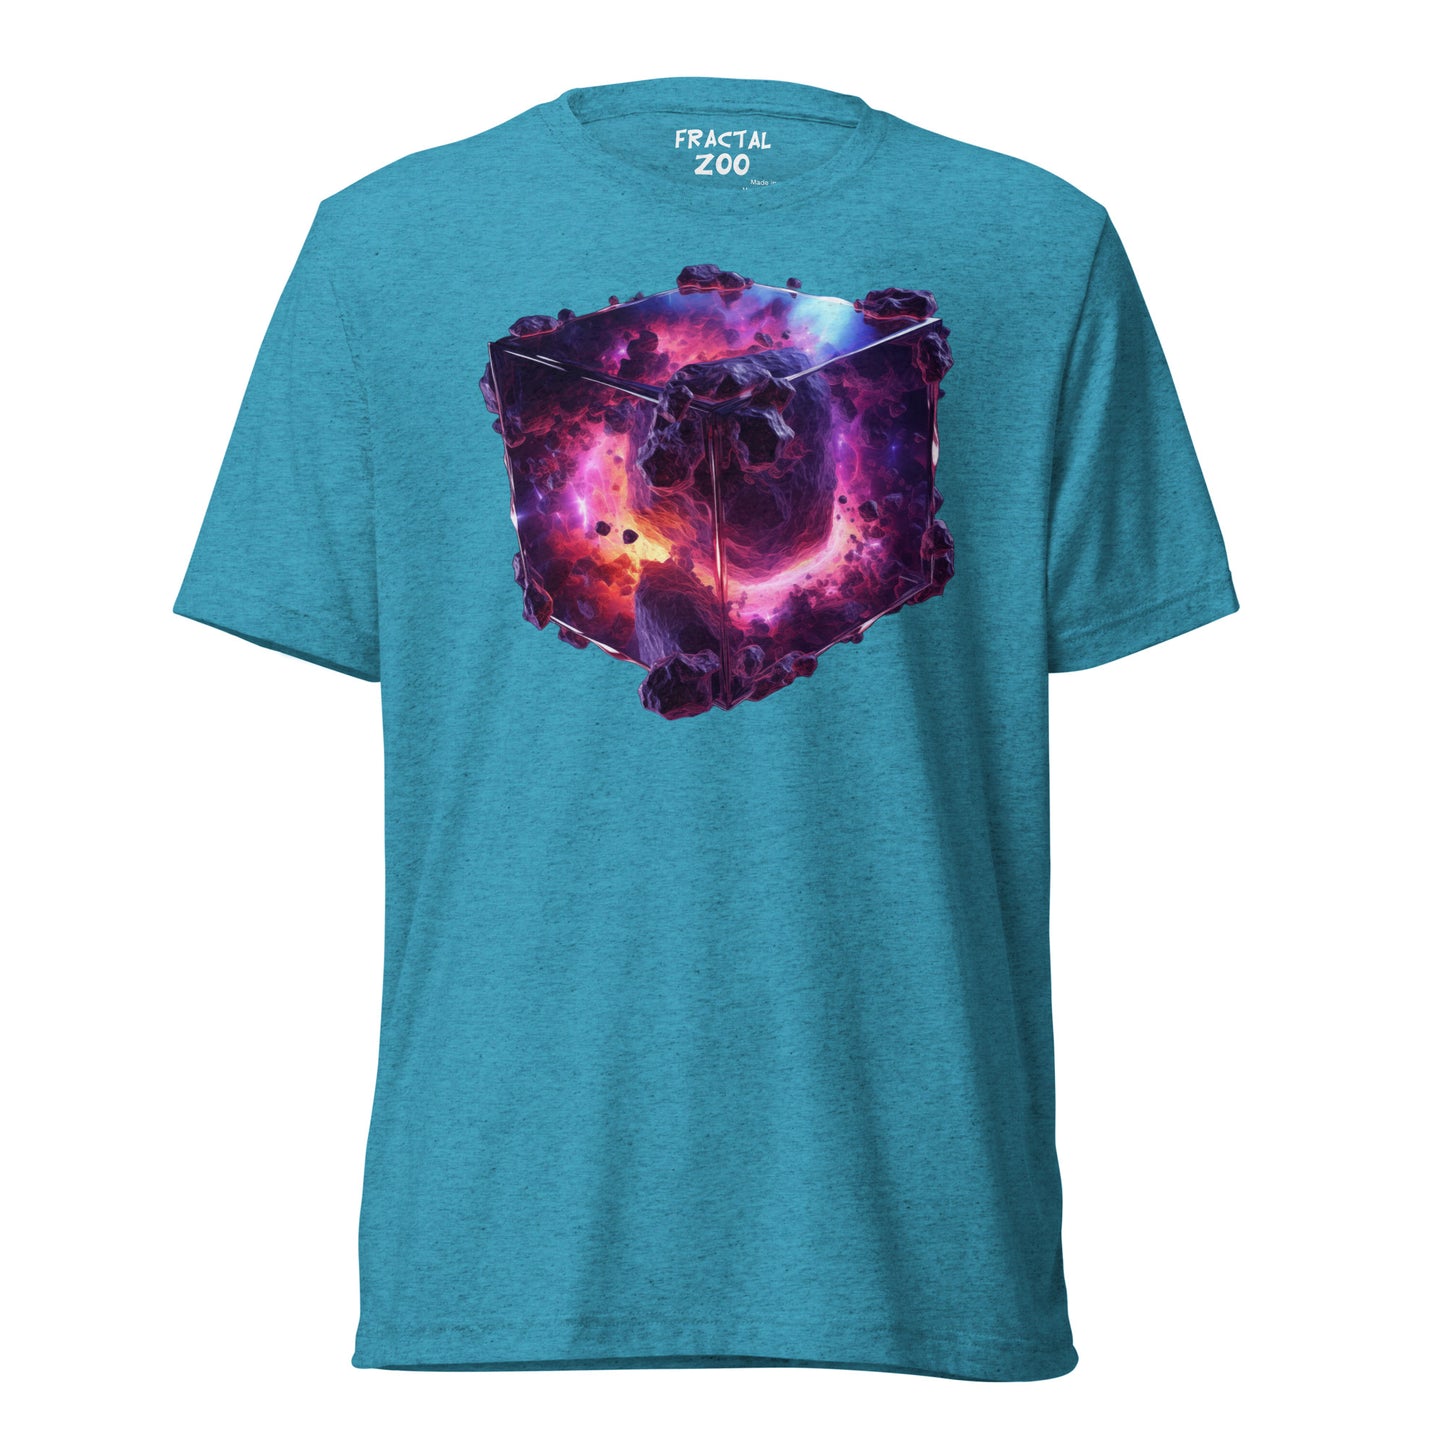 Cosmic Cube Collision - Asteroid Themed T-Shirt for Space Enthusiasts